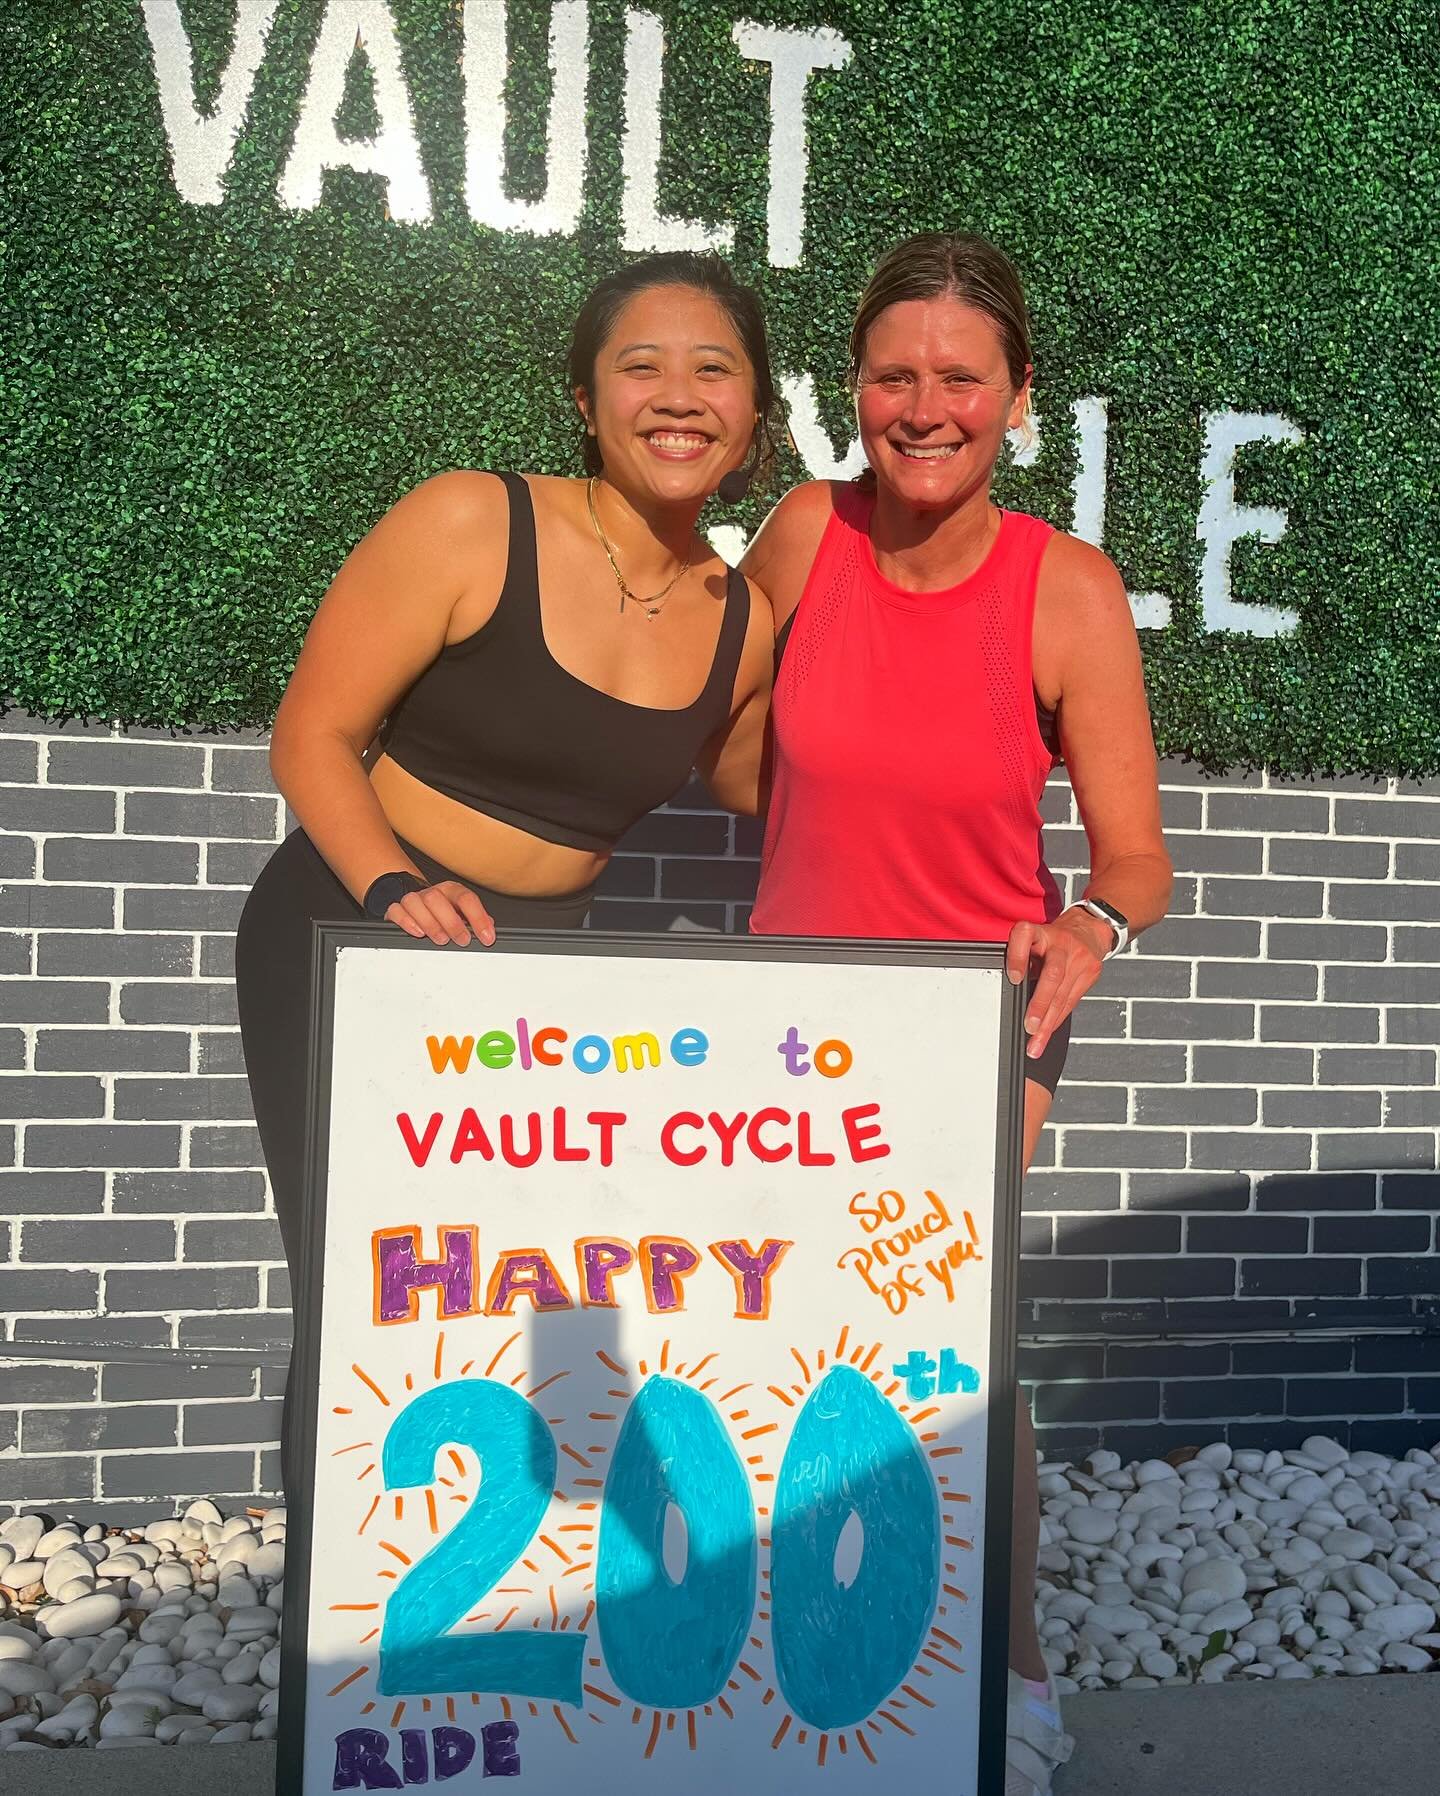 Happy Milestone Monday to Kristin &amp; Ash reaching 200 rides, &amp; Lisa riding 99.5&hellip;😉 &amp; the big 100! 👑🚲 We could not be more proud of how the Vault Cycle fam is growing!